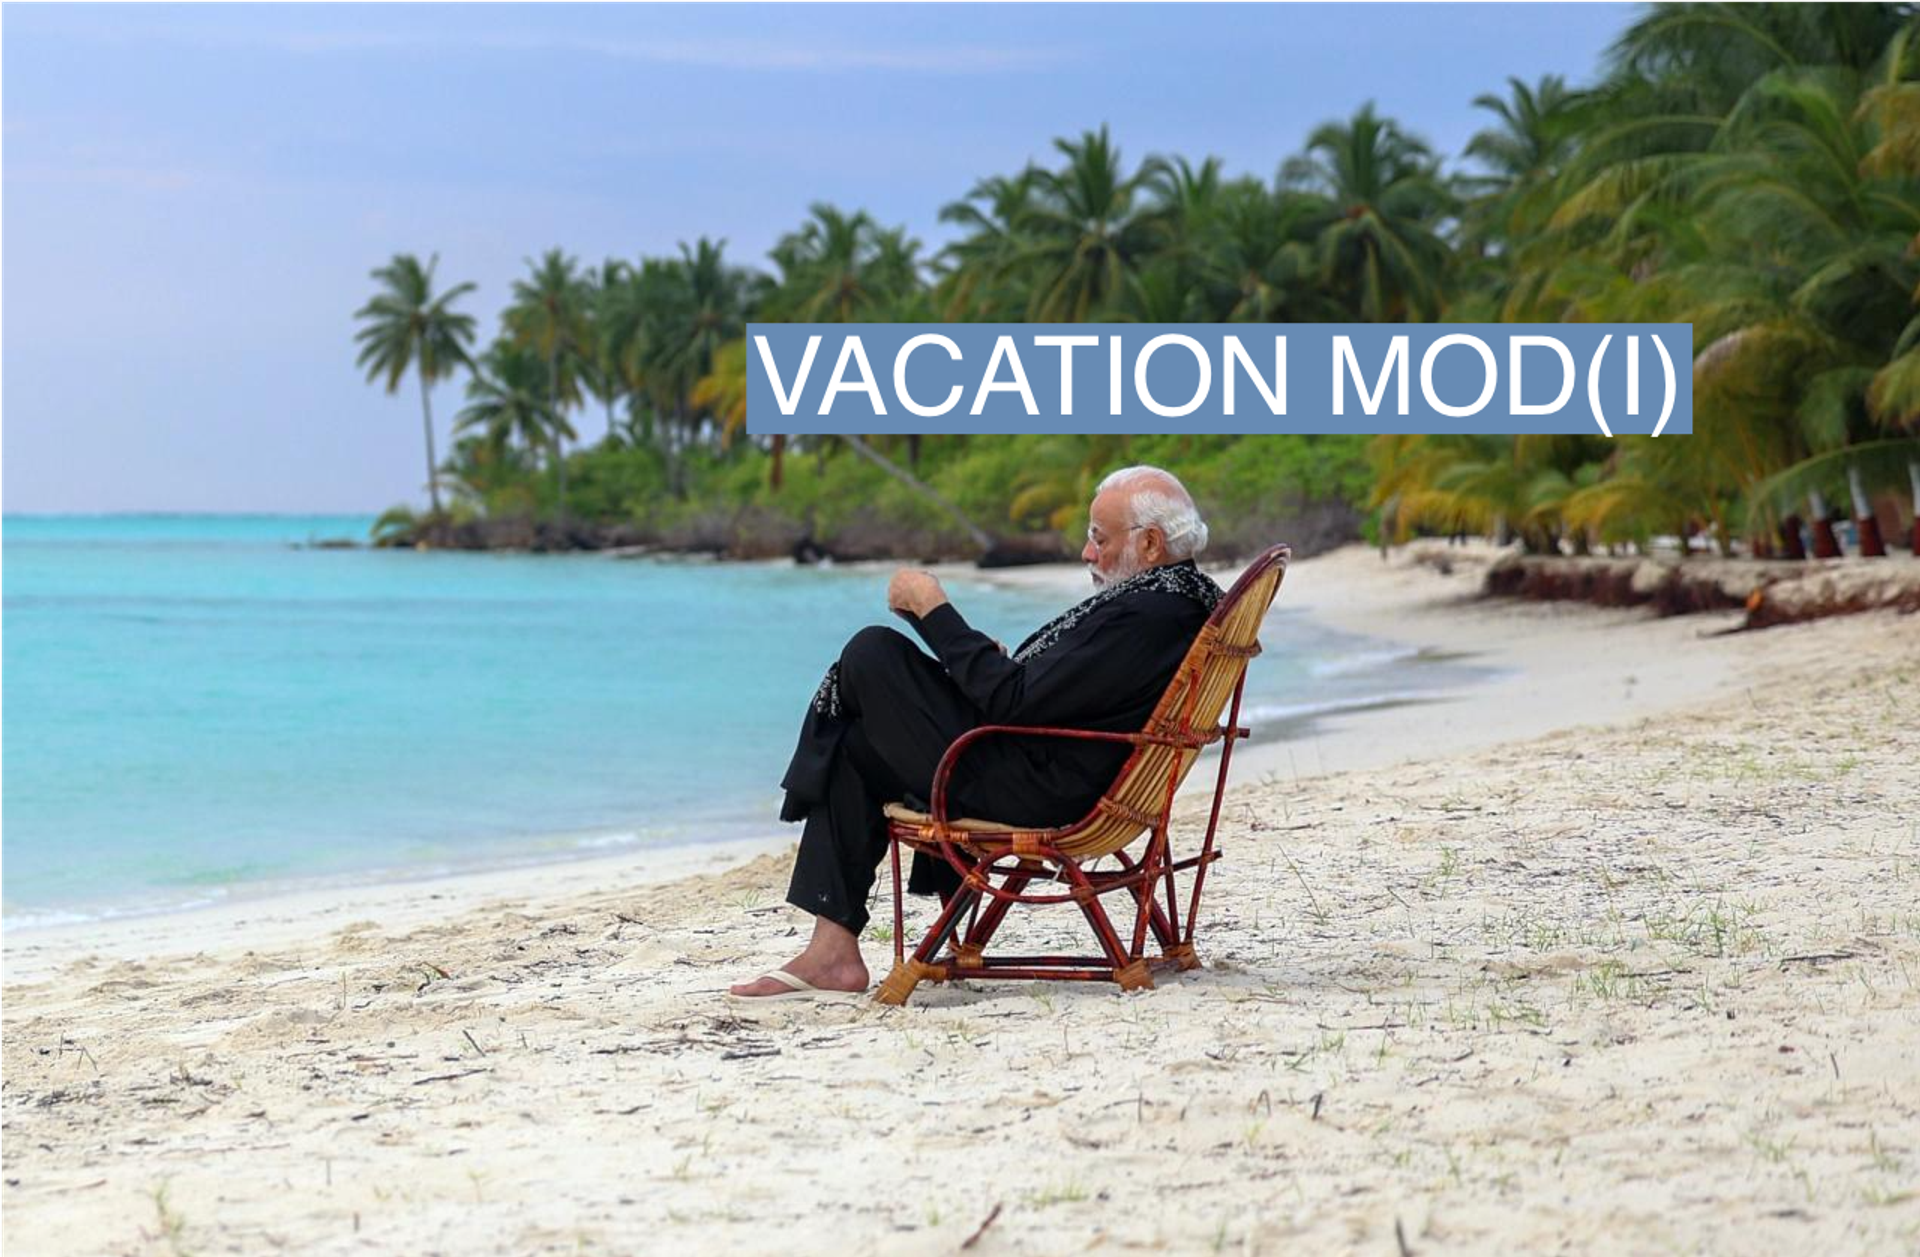 Prime Minister Narendra Modi takes a rest on one of the beaches in Lakshadweep.